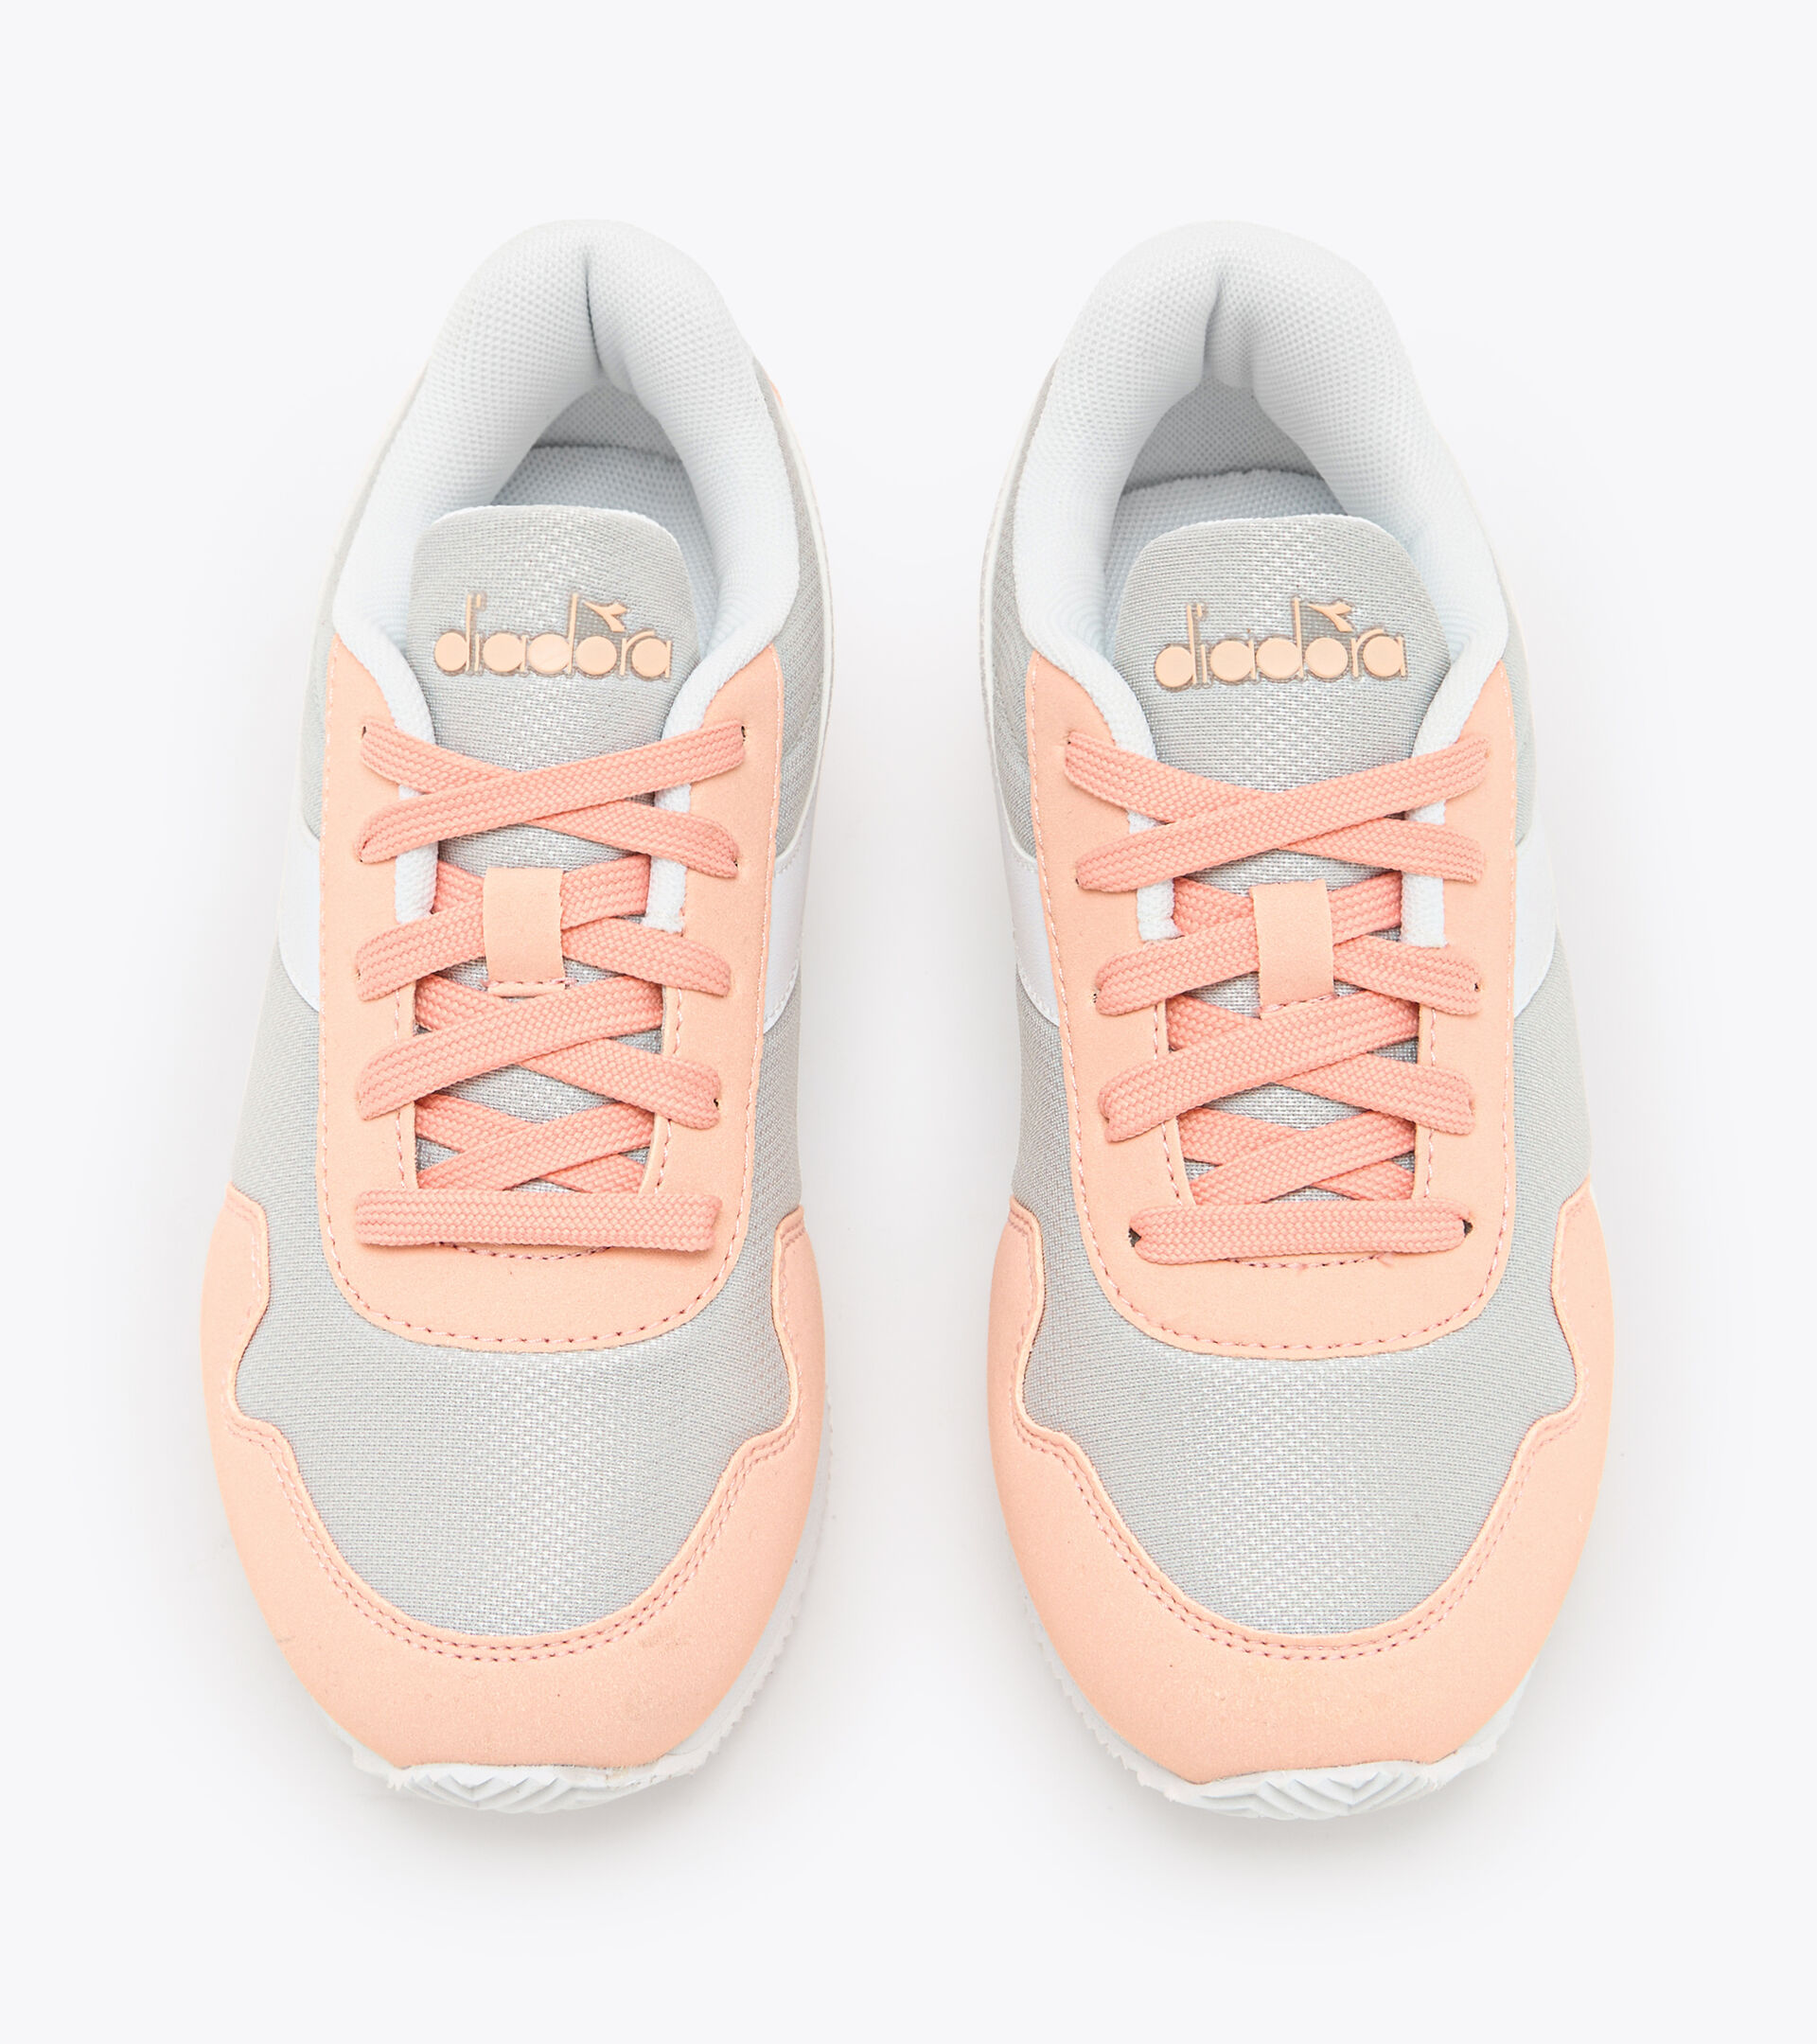 Sports shoes - Youth 8-16 years
 SIMPLE RUN GS PINK MELODY - Diadora